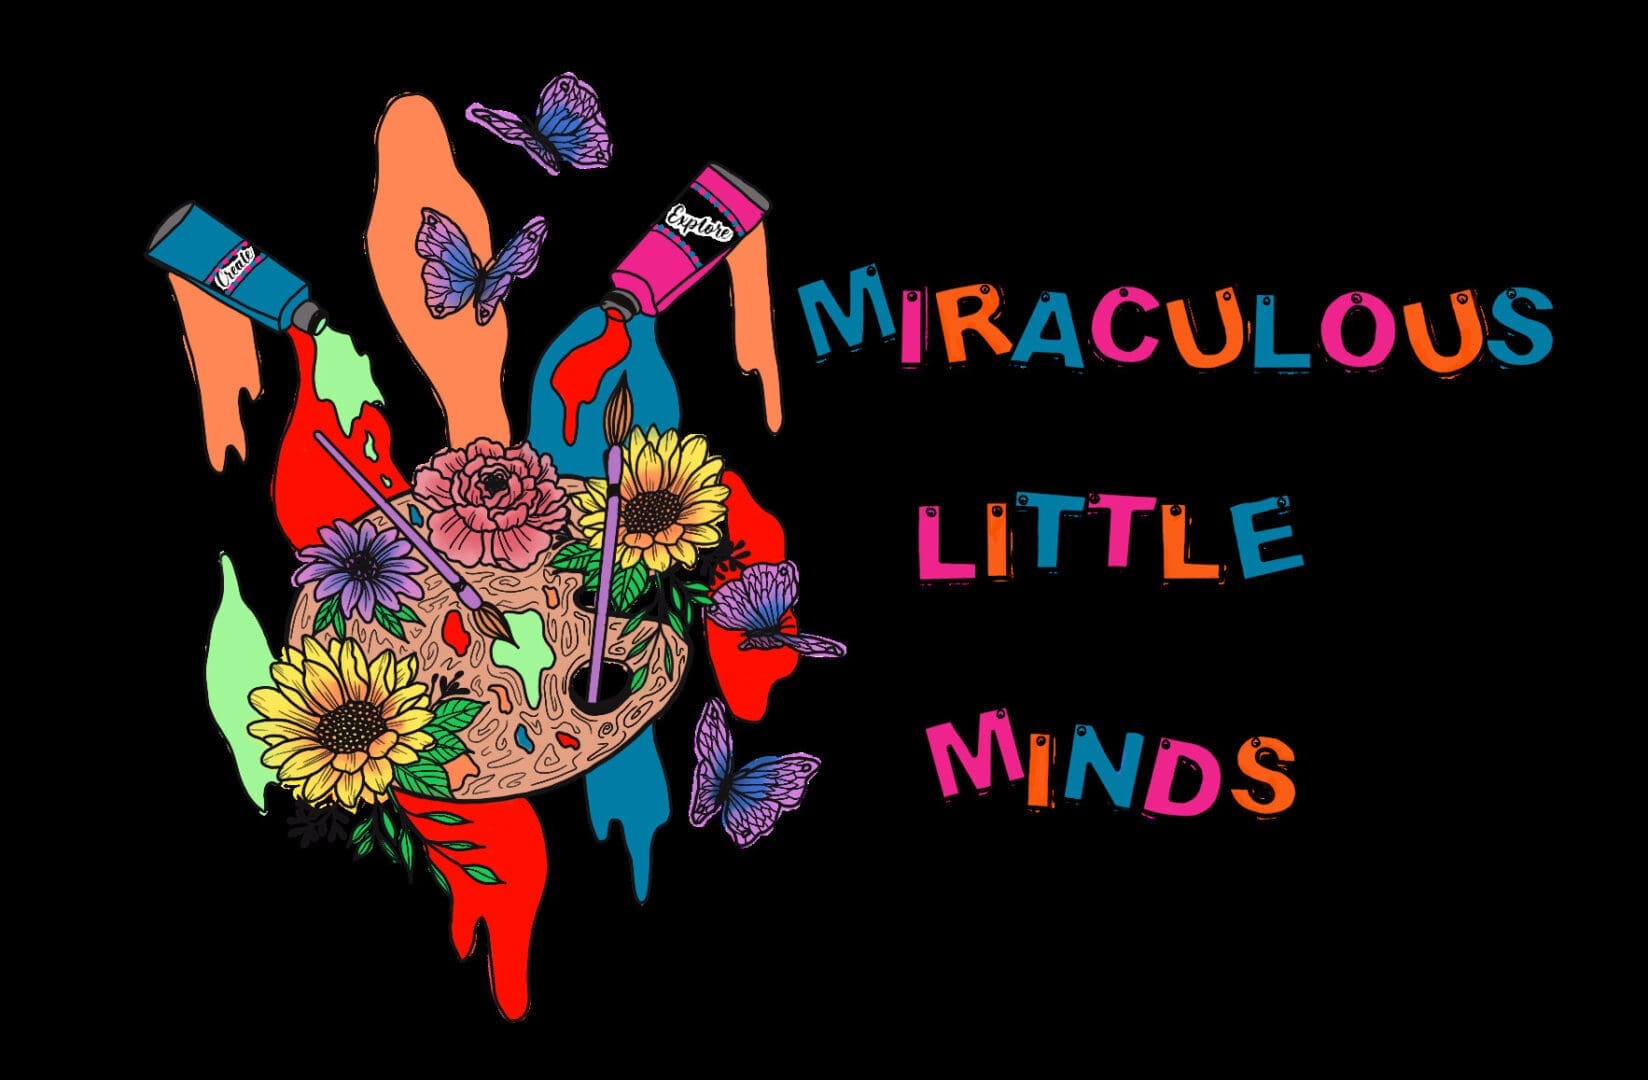 Miraculous Little Minds at Paxcroft Mead Community Centre